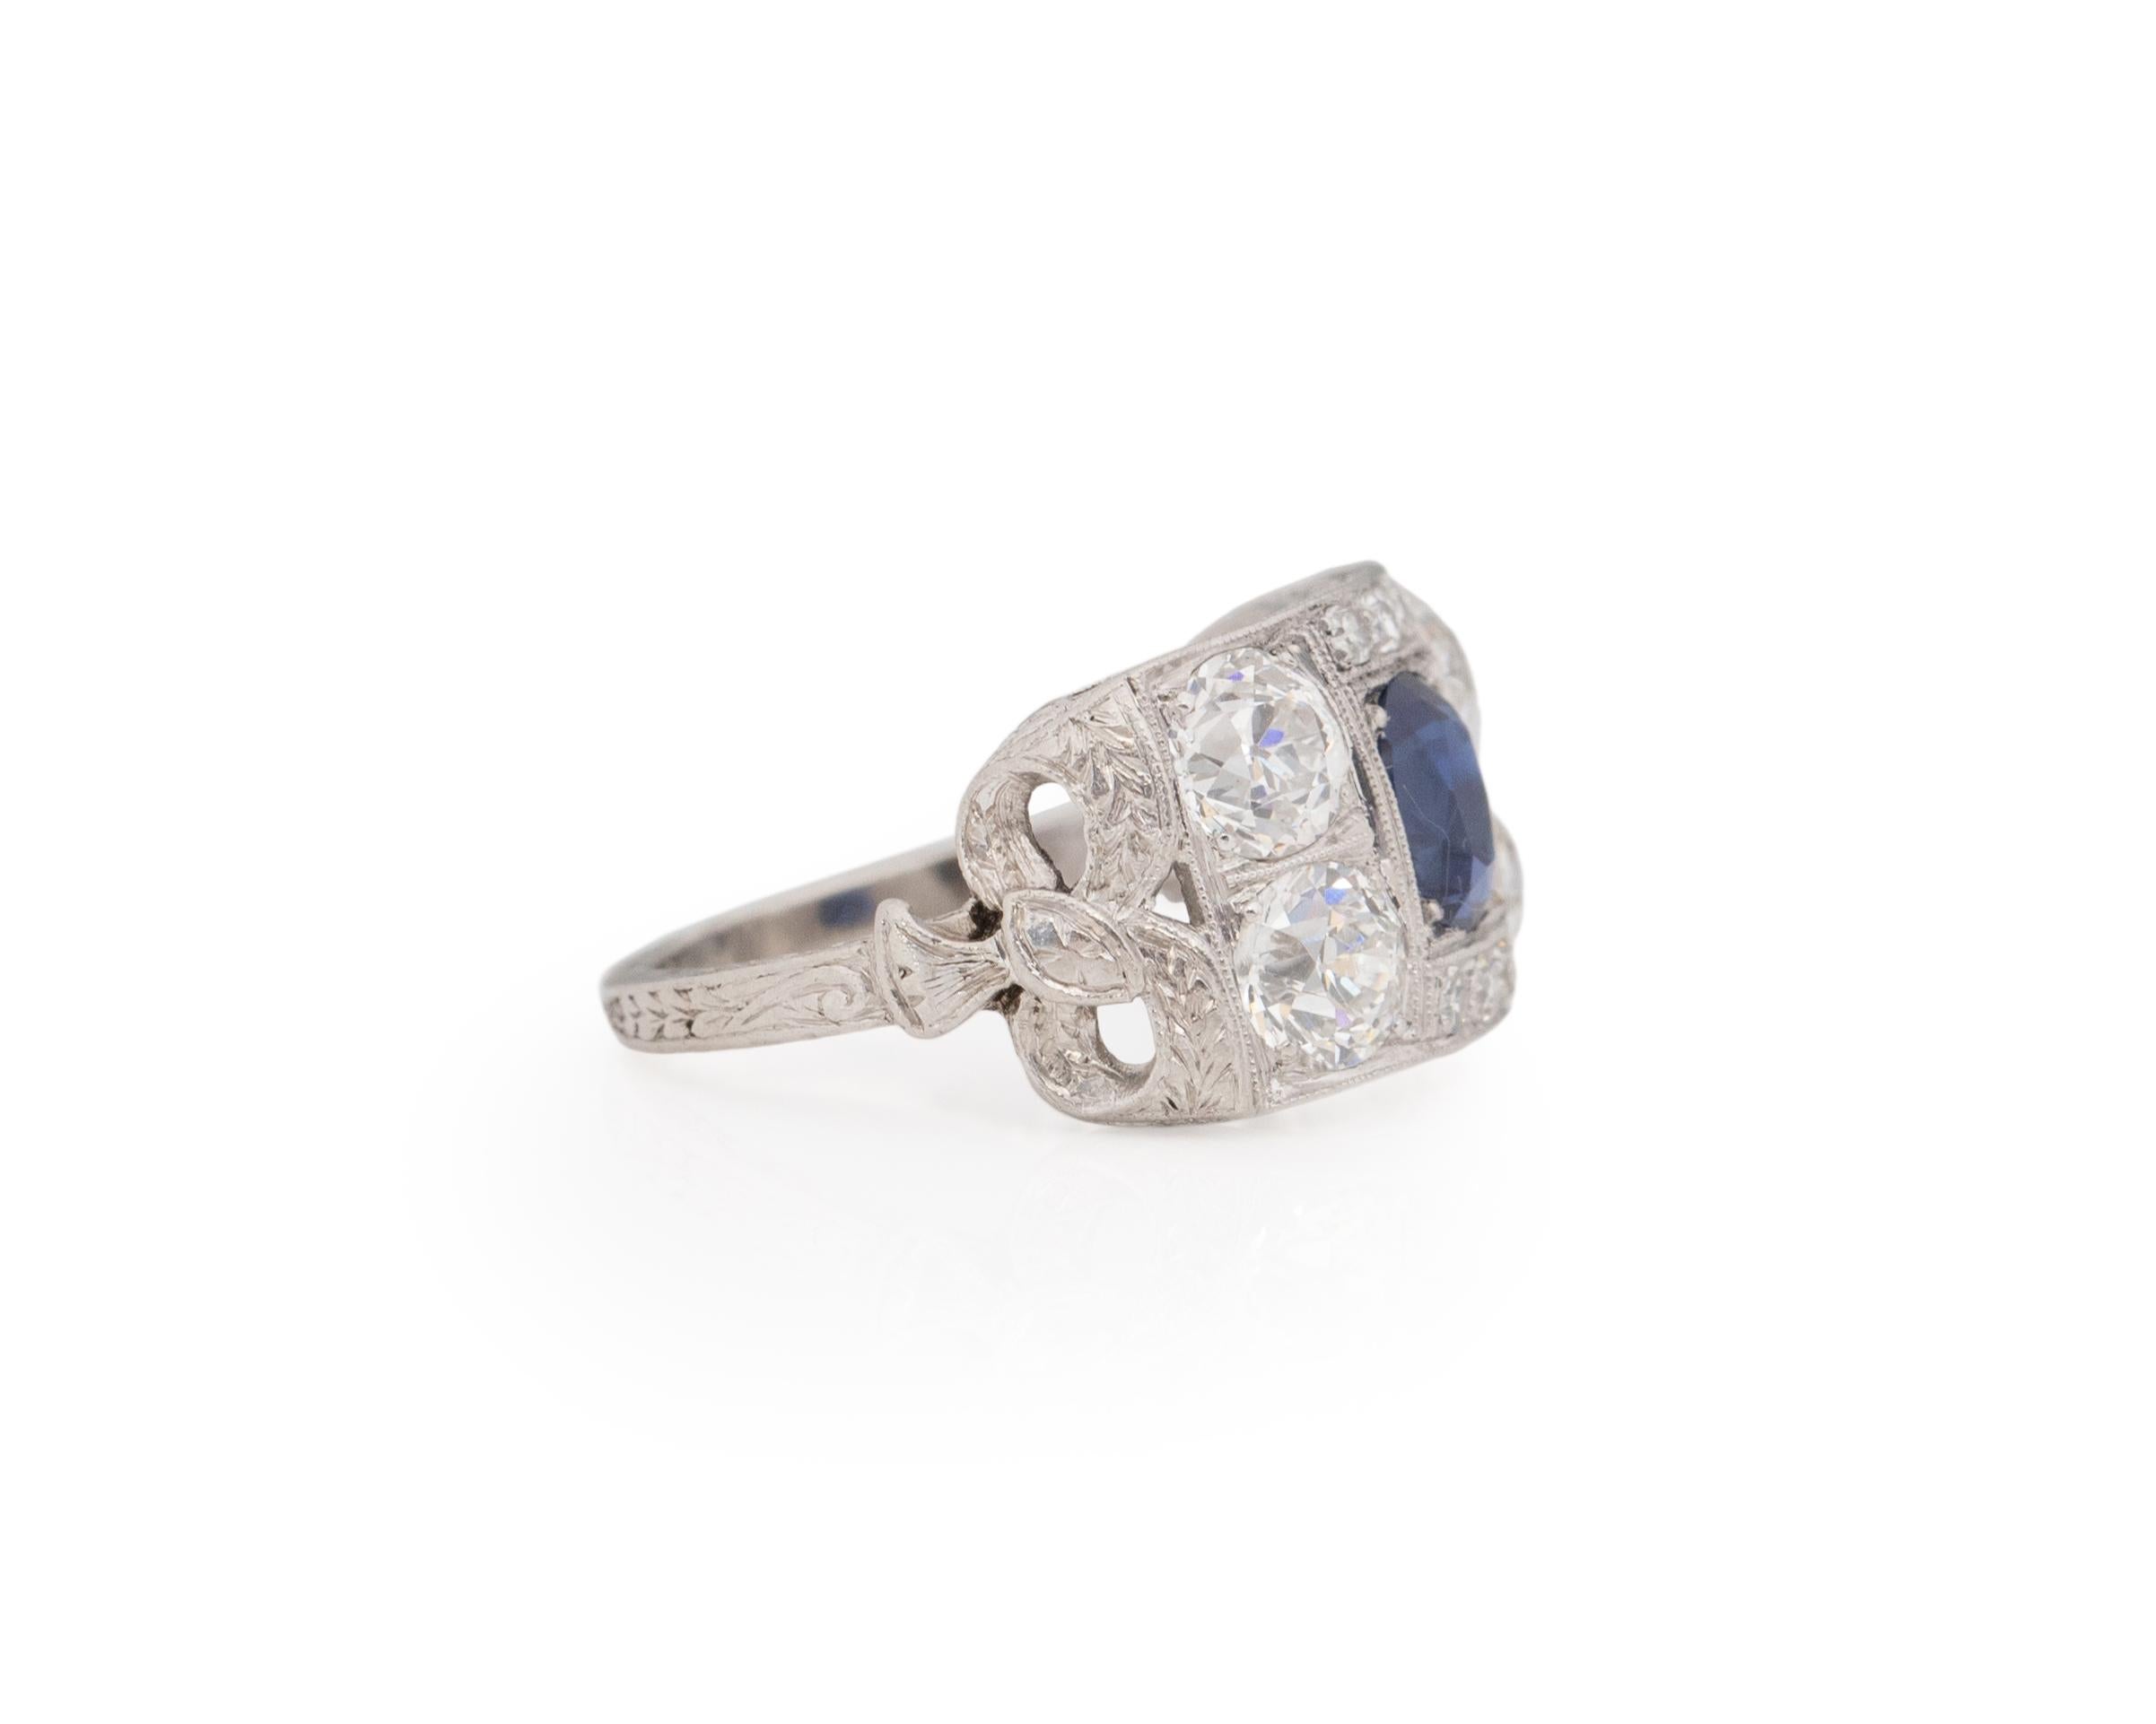 Ring Size: 4.75
Metal Type: Platinum  [Hallmarked, and Tested]
Weight:  5.3grams

Center Diamond Details:
GIA LAB REPORT #: 6227725604
Weight: 1.14ct
Cut: Antique Cushion
Color: Blue
Clarity: VS
Measurements: 6.07mm x 5.32mm x 3.78mm 

Finger to Top